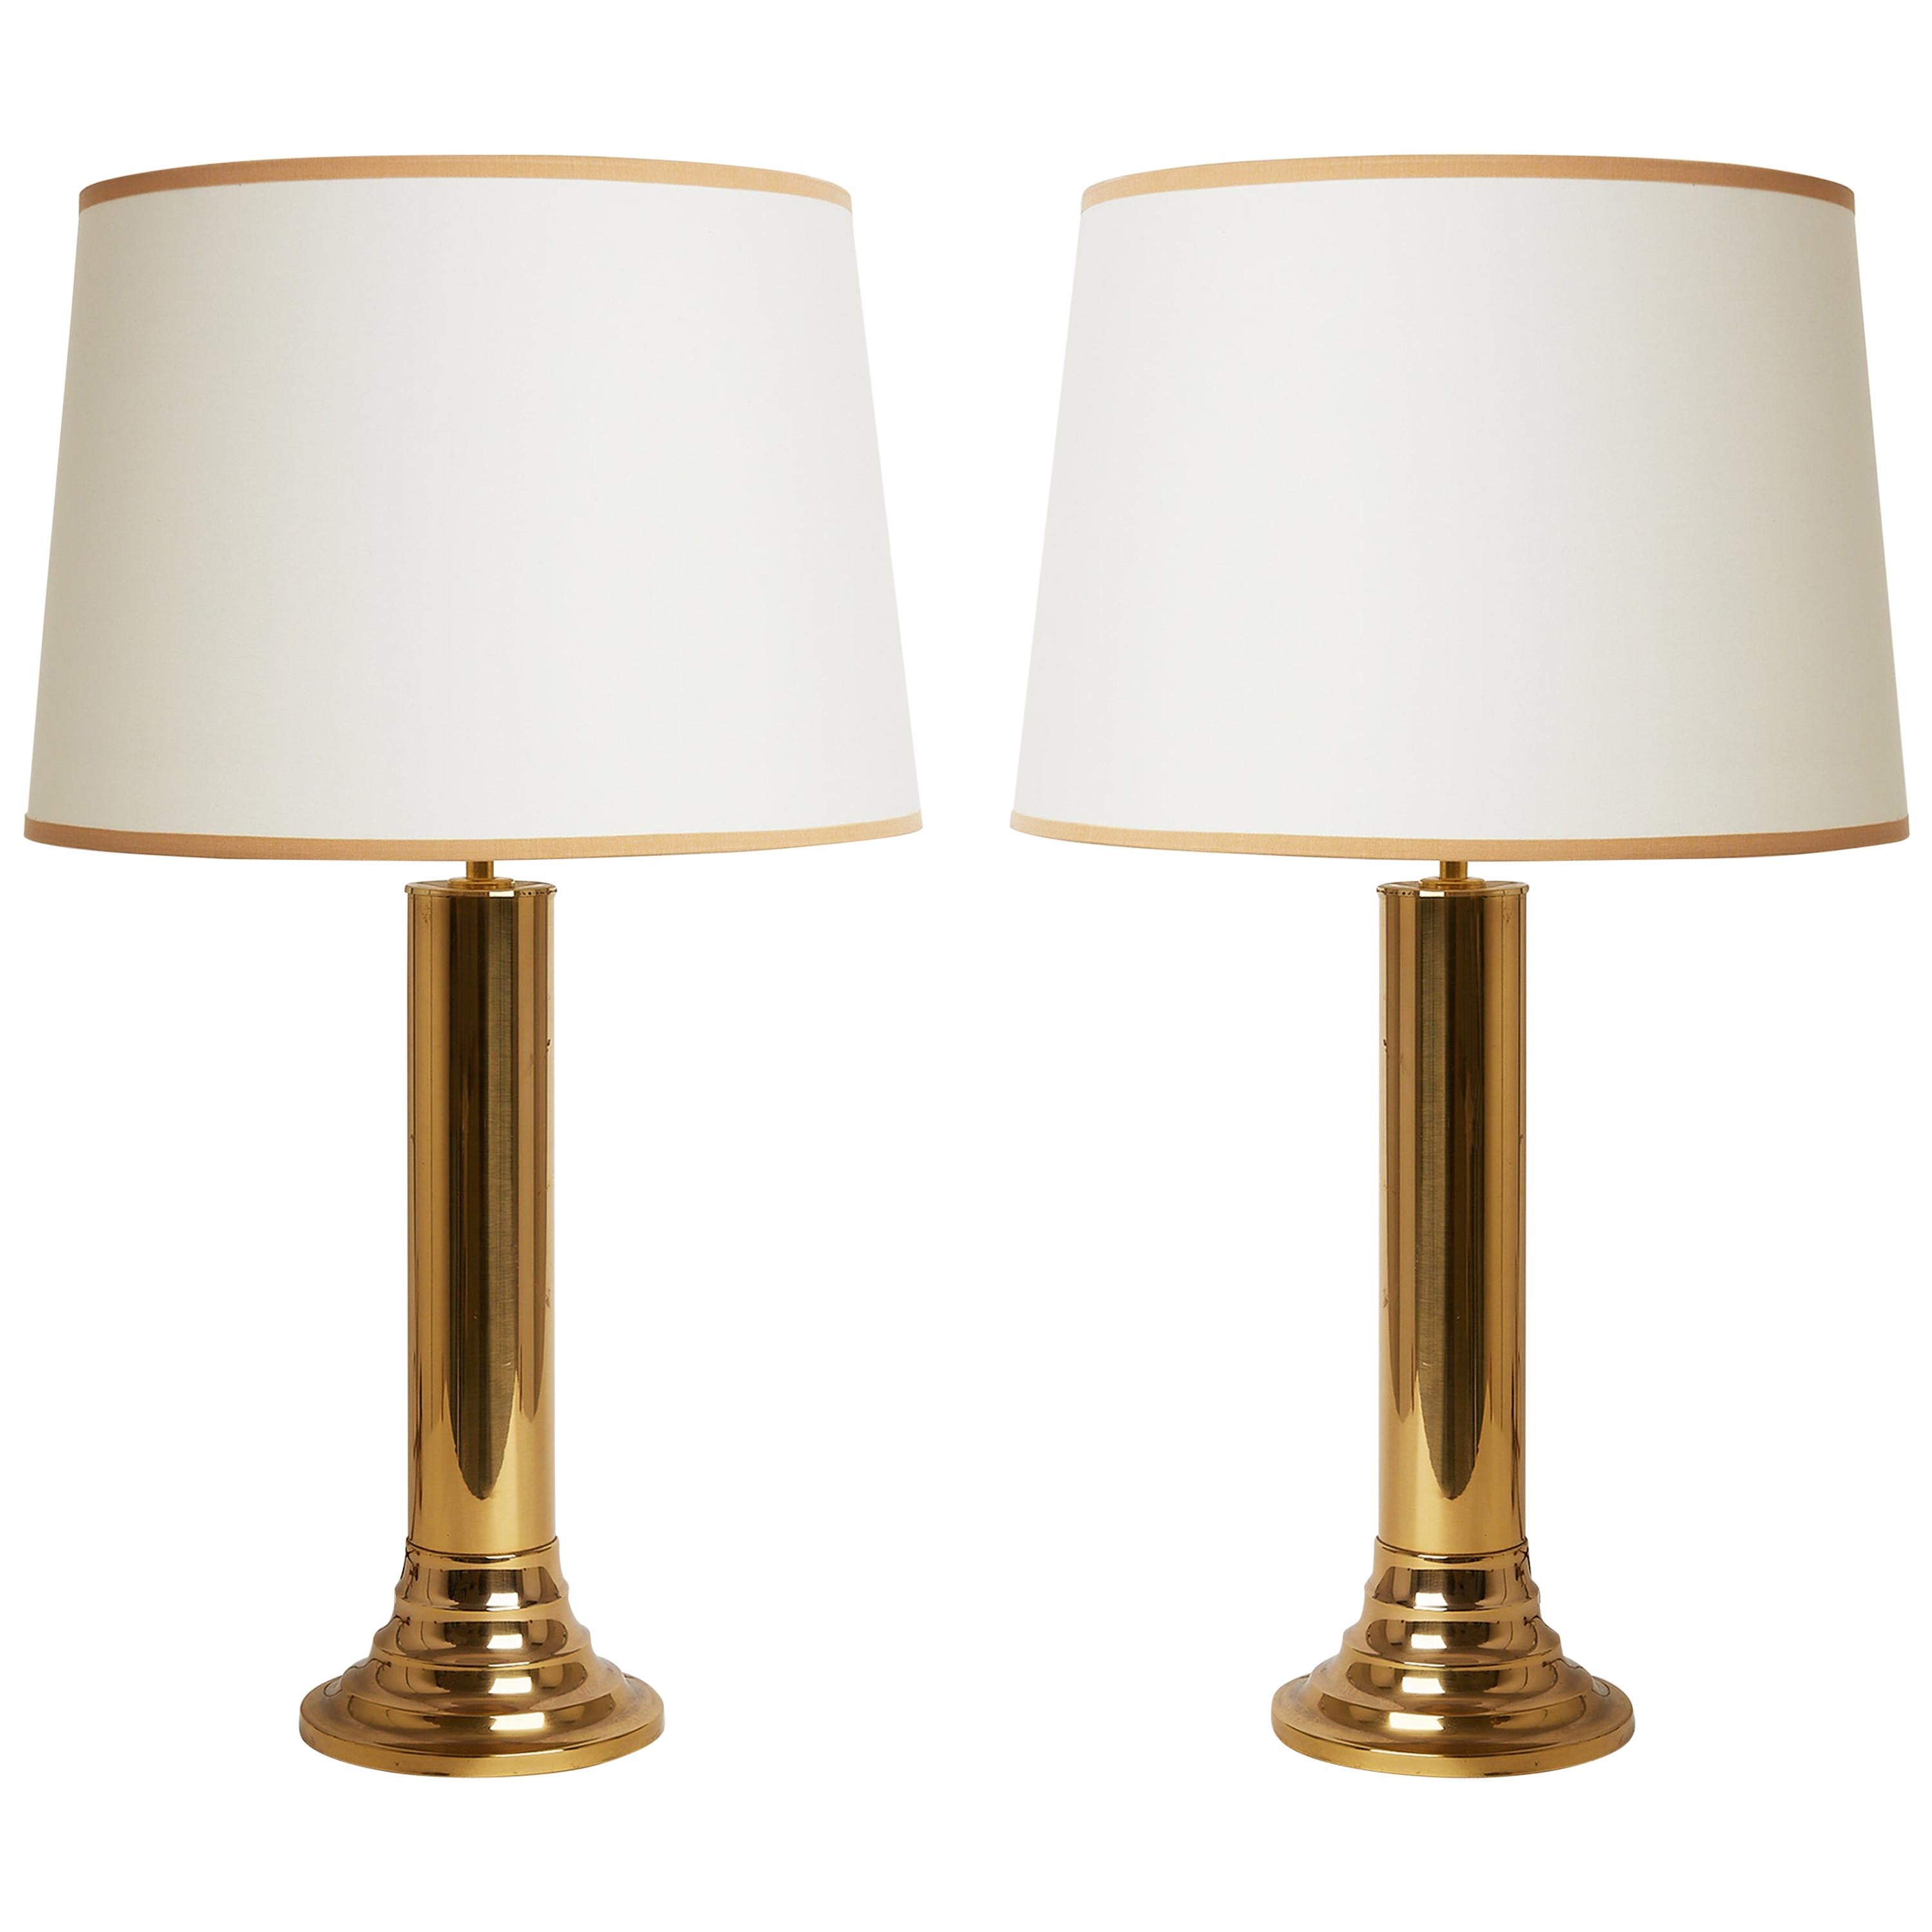 Pair of Midcentury Brass Table Lamps by Bergboms